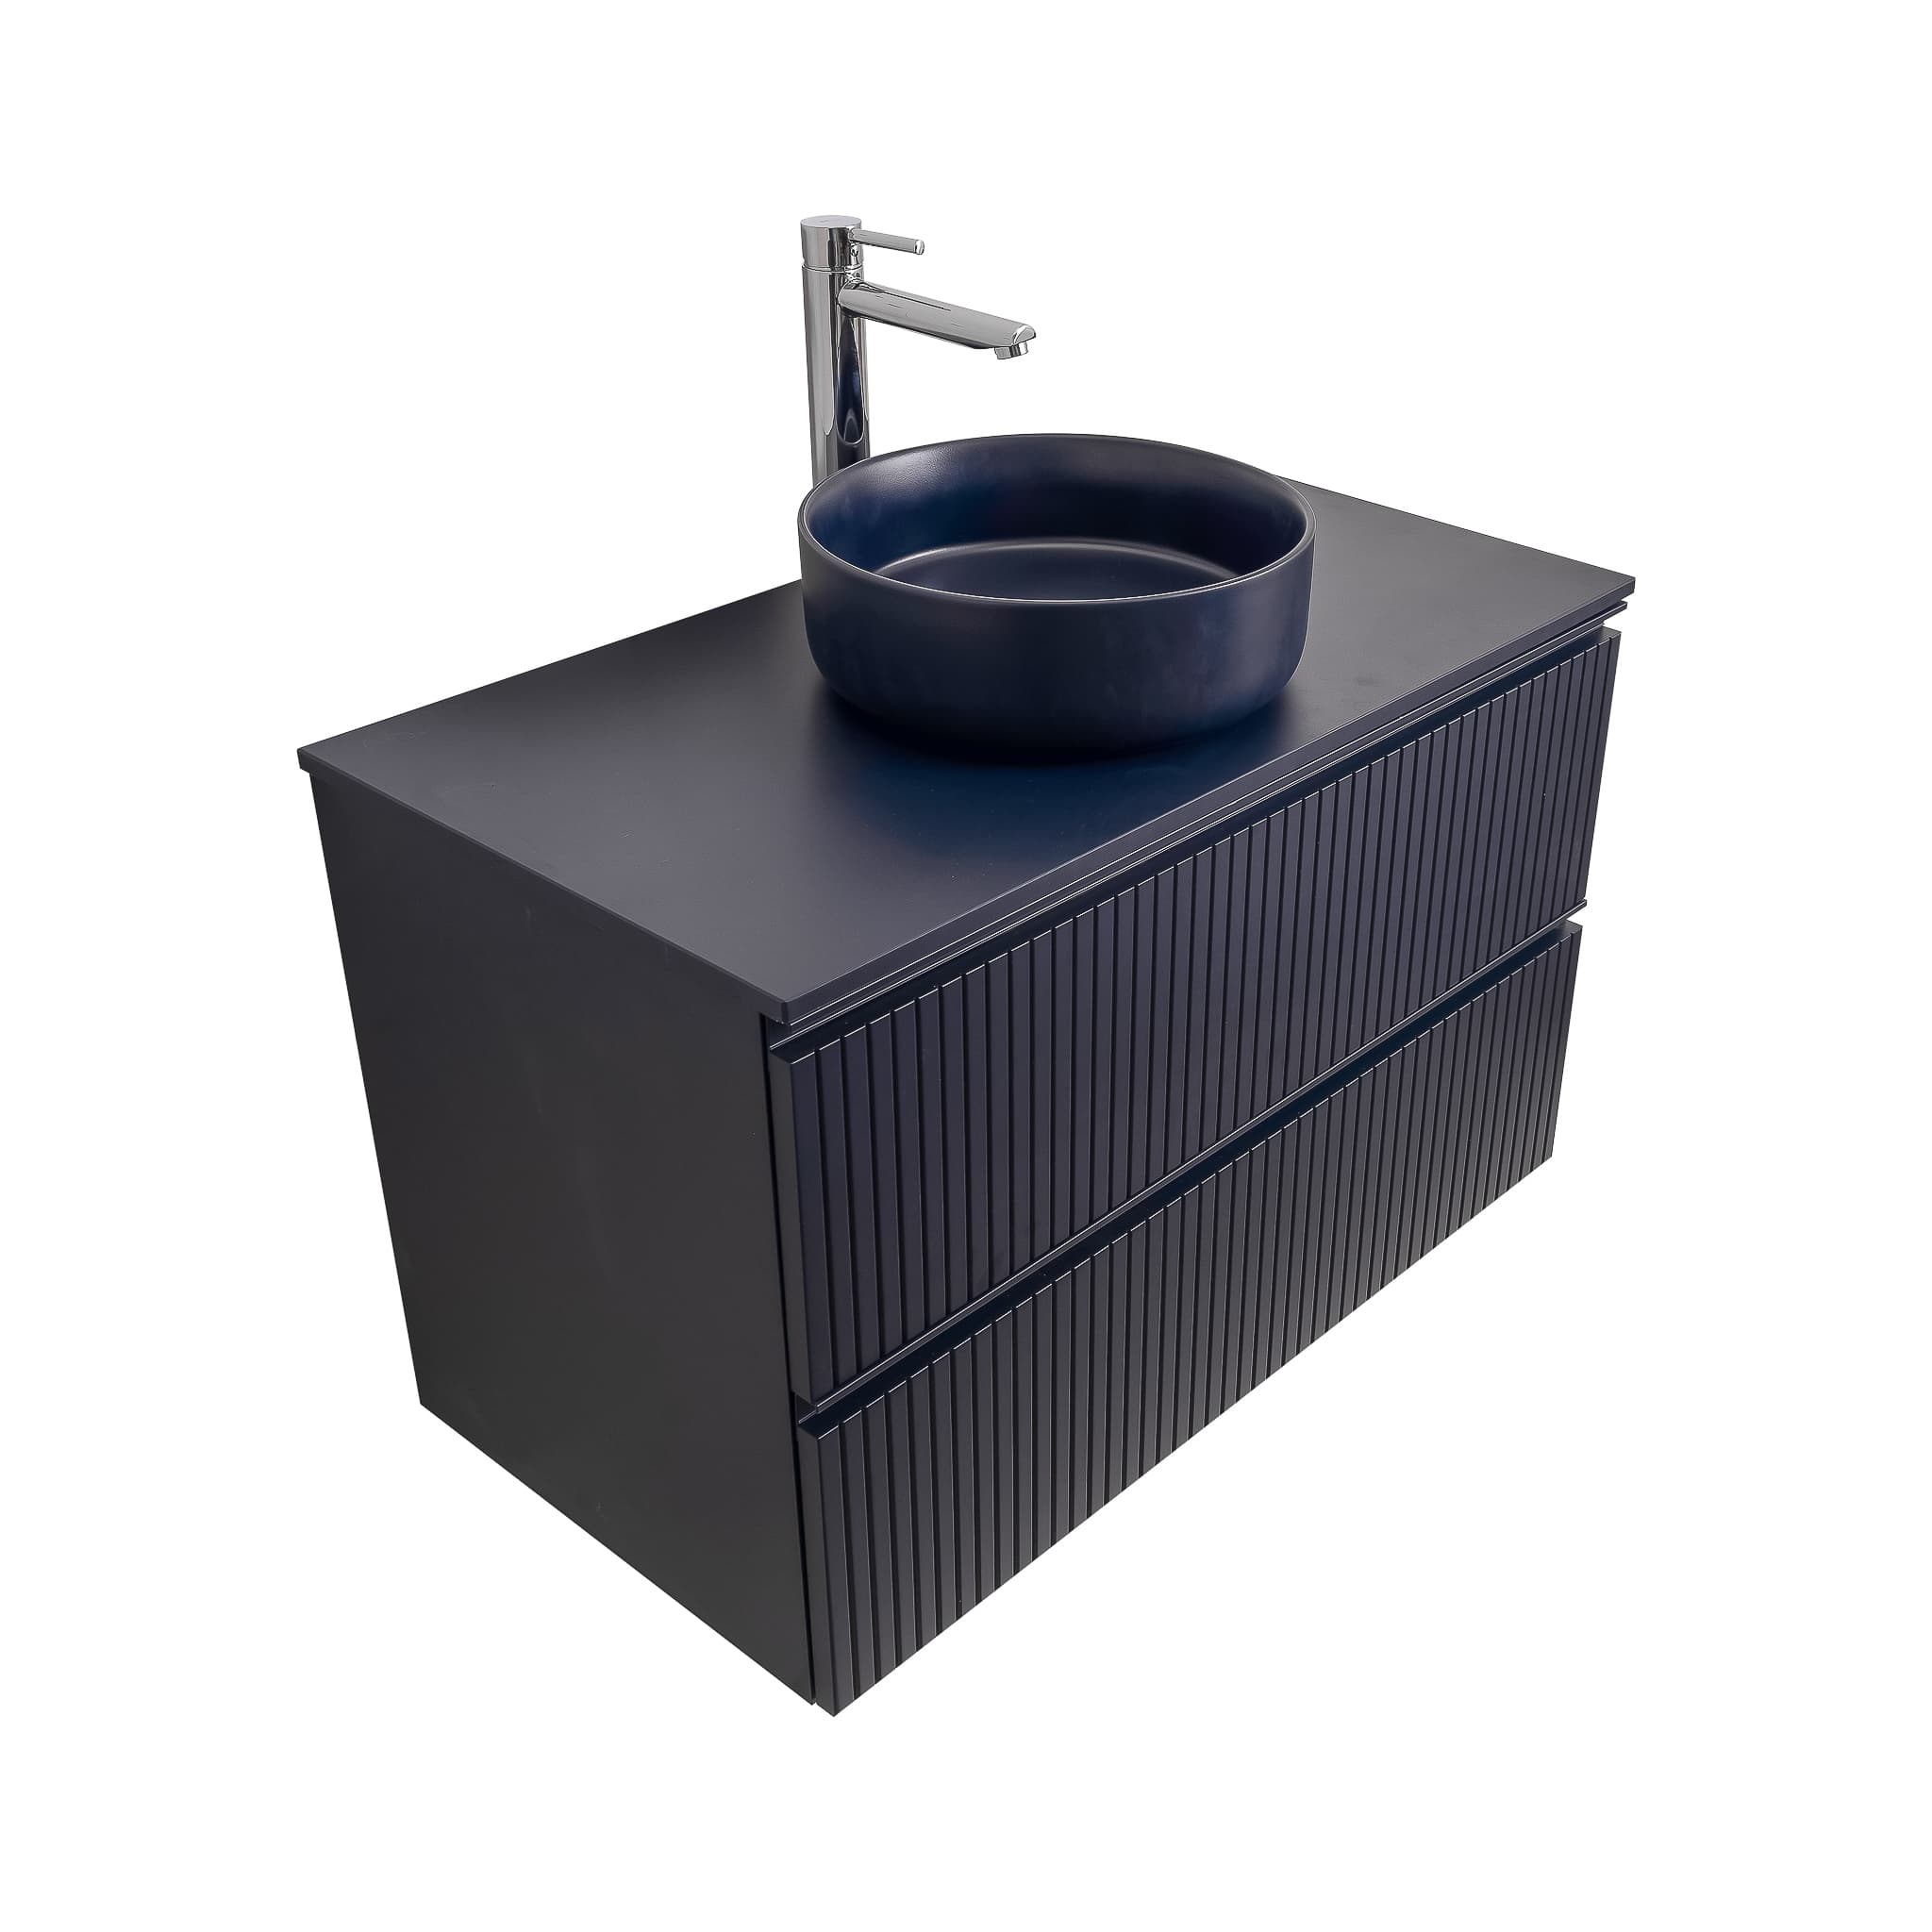 Ares 31.5 Matte Navy Blue Cabinet, Ares Navy Blue Top And Ares Navy Blue Ceramic Basin, Wall Mounted Modern Vanity Set